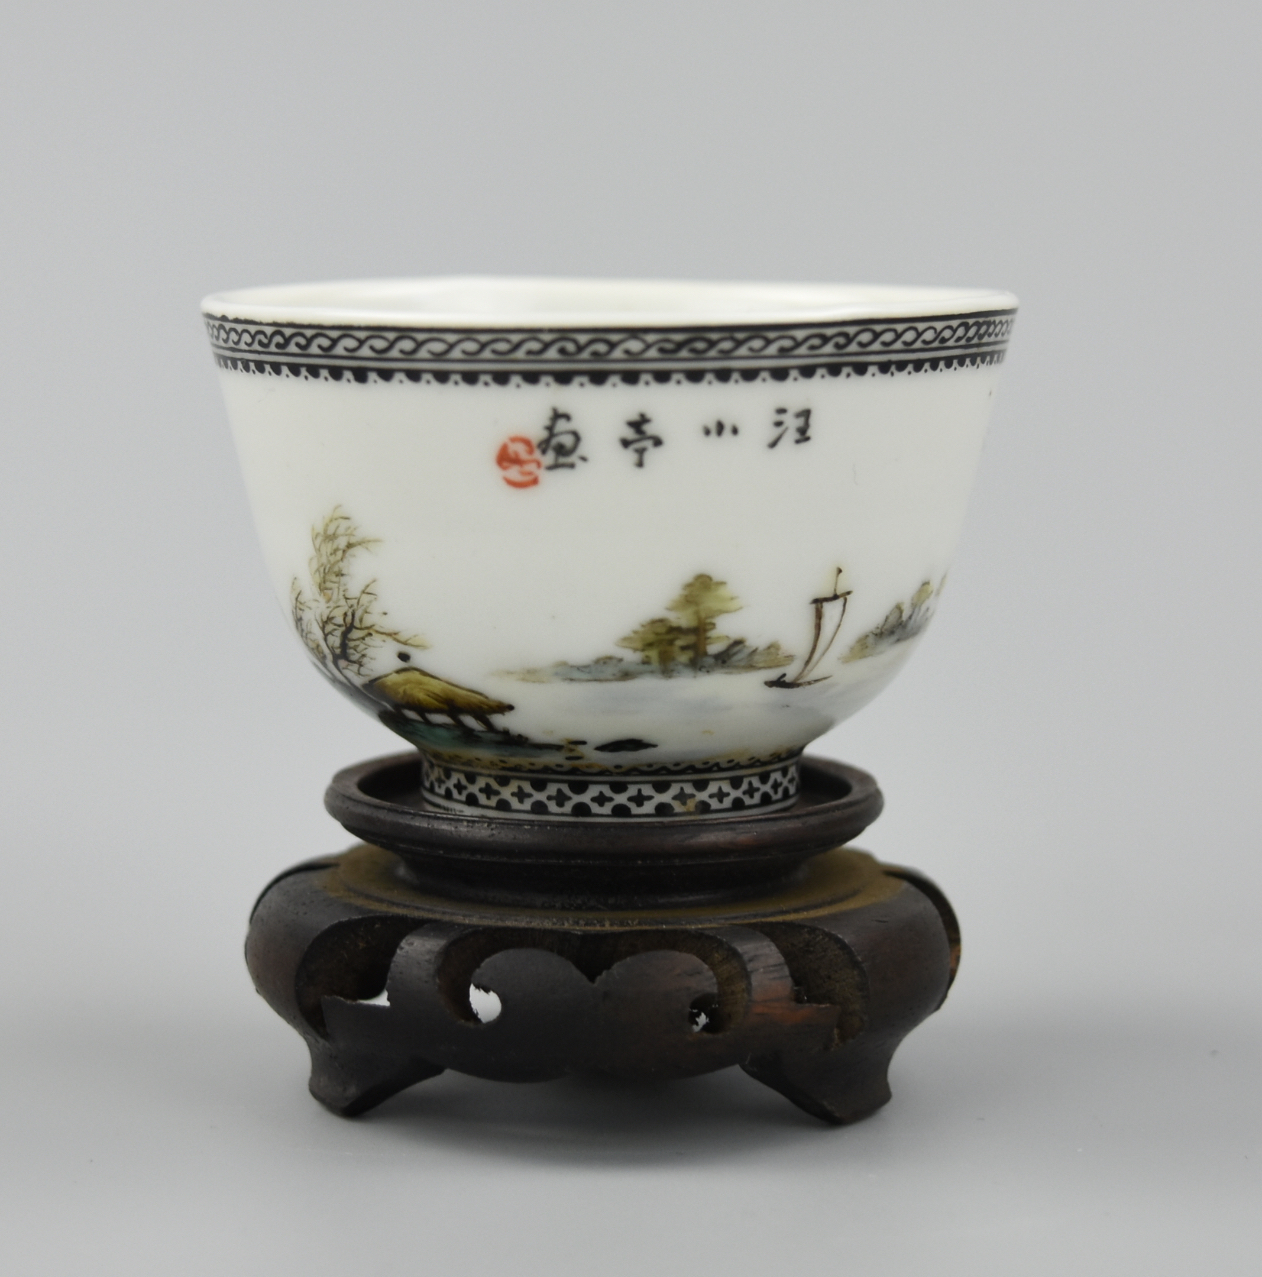 SMALL CUP W/ RURAL VIGNETTE BY